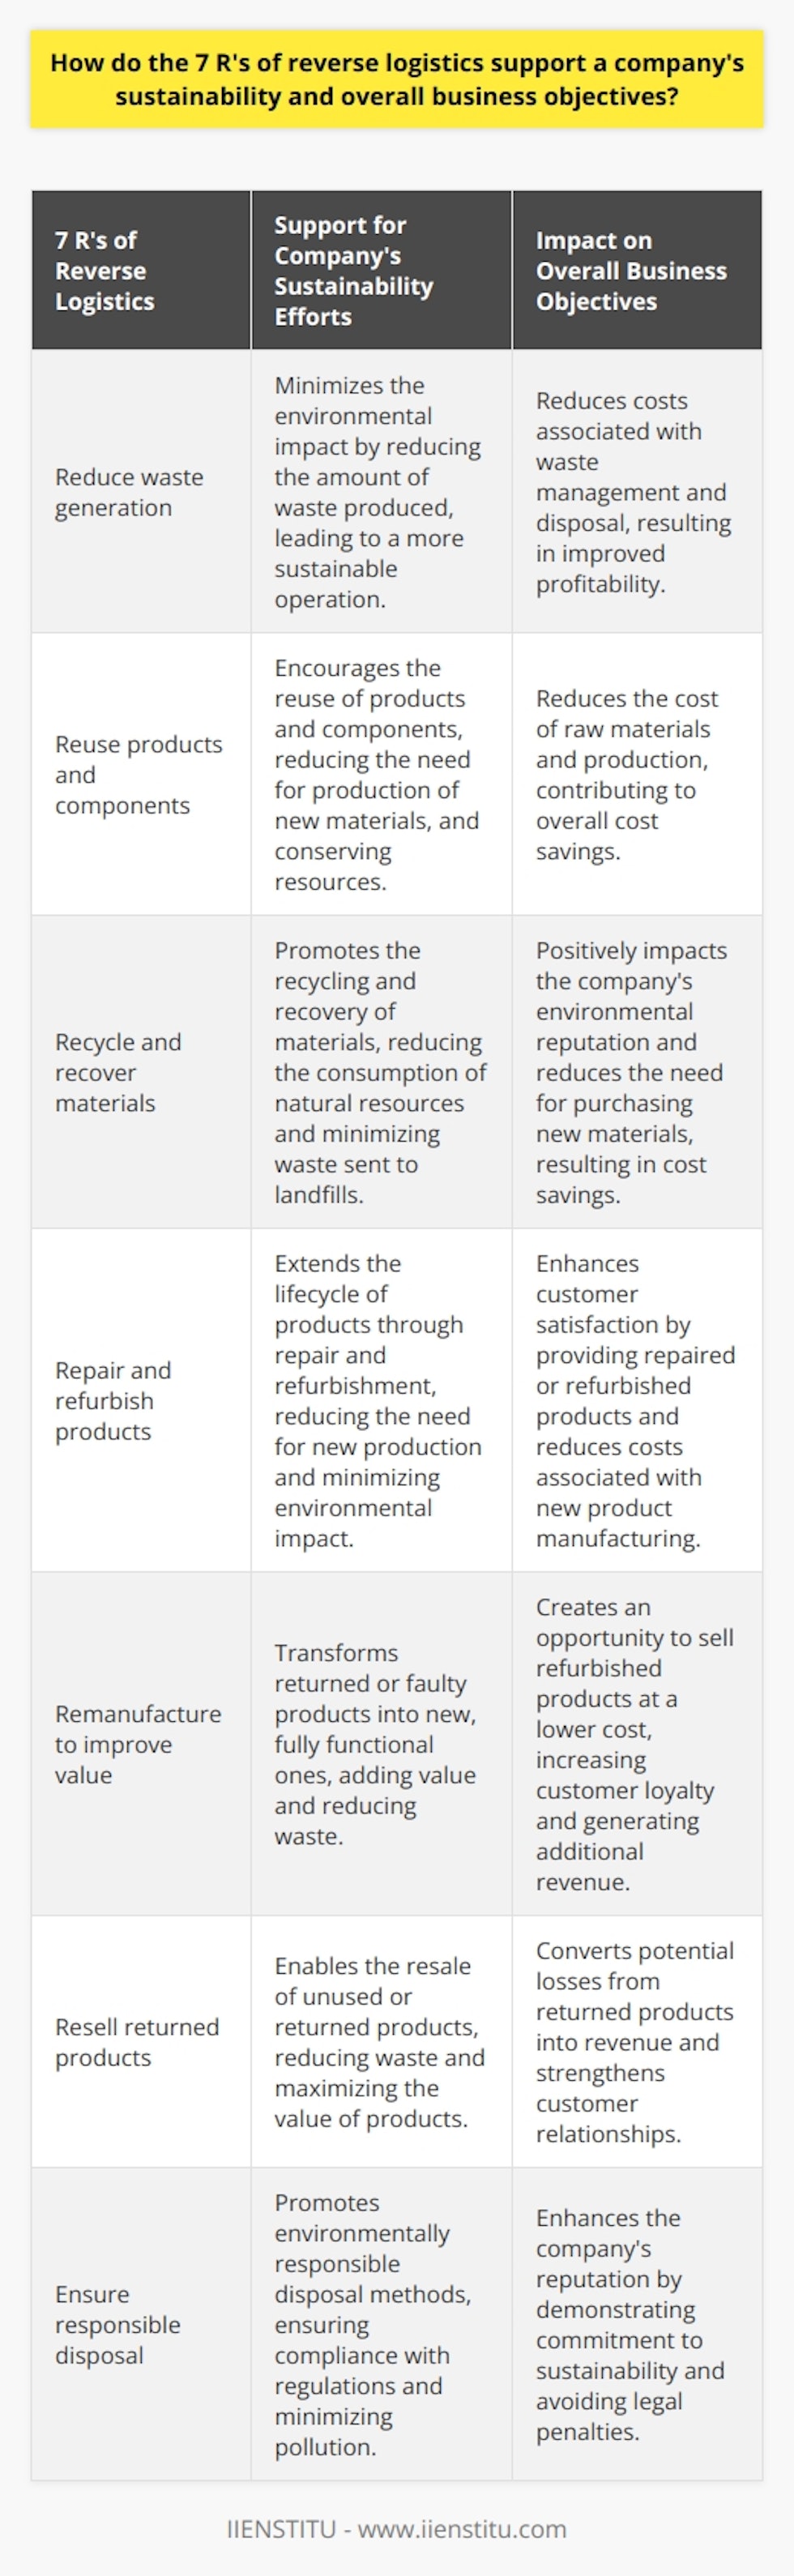 The 7 R's of reverse logistics play a significant role in supporting a company's sustainability efforts and overall business objectives. By implementing these principles, businesses can reduce waste generation, reuse products and components, recycle and recover materials, repair and refurbish products, remanufacture to improve value, resell returned products, and ensure responsible disposal. These practices not only contribute to environmental preservation but also result in cost savings, improved customer satisfaction, and the generation of additional revenue. By embracing the 7 R's of reverse logistics, companies can effectively integrate sustainability into their core business strategies, making a positive impact on the environment and achieving their business goals.